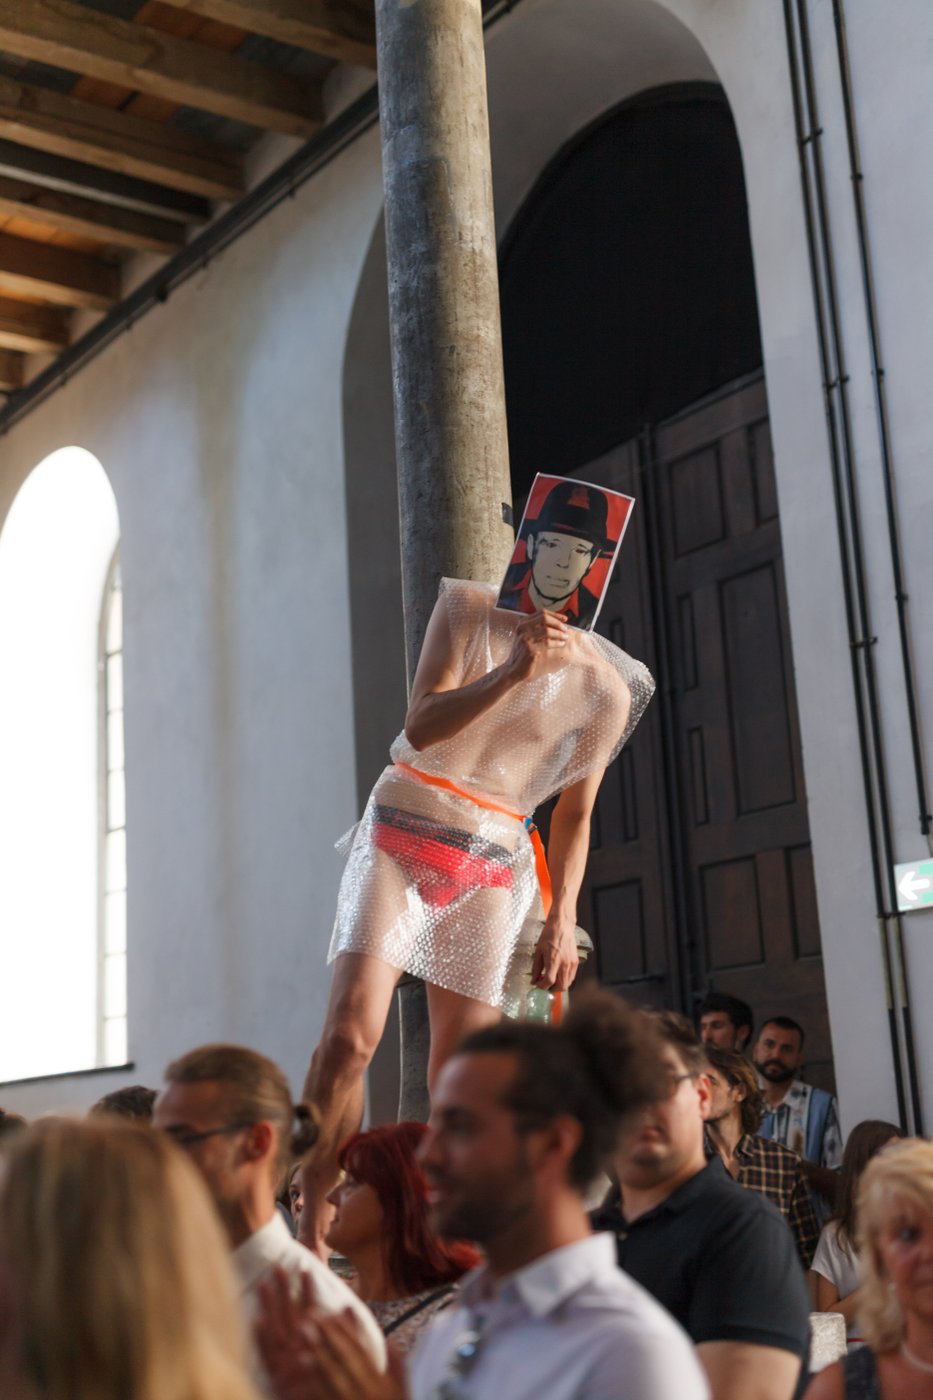 Artistic intervention at the graduation ceremony 2019. A person has wrapped his naked body with bubble wrap. You can see the red underpants, in front of the face he holds a portrait of Josef Beuys.